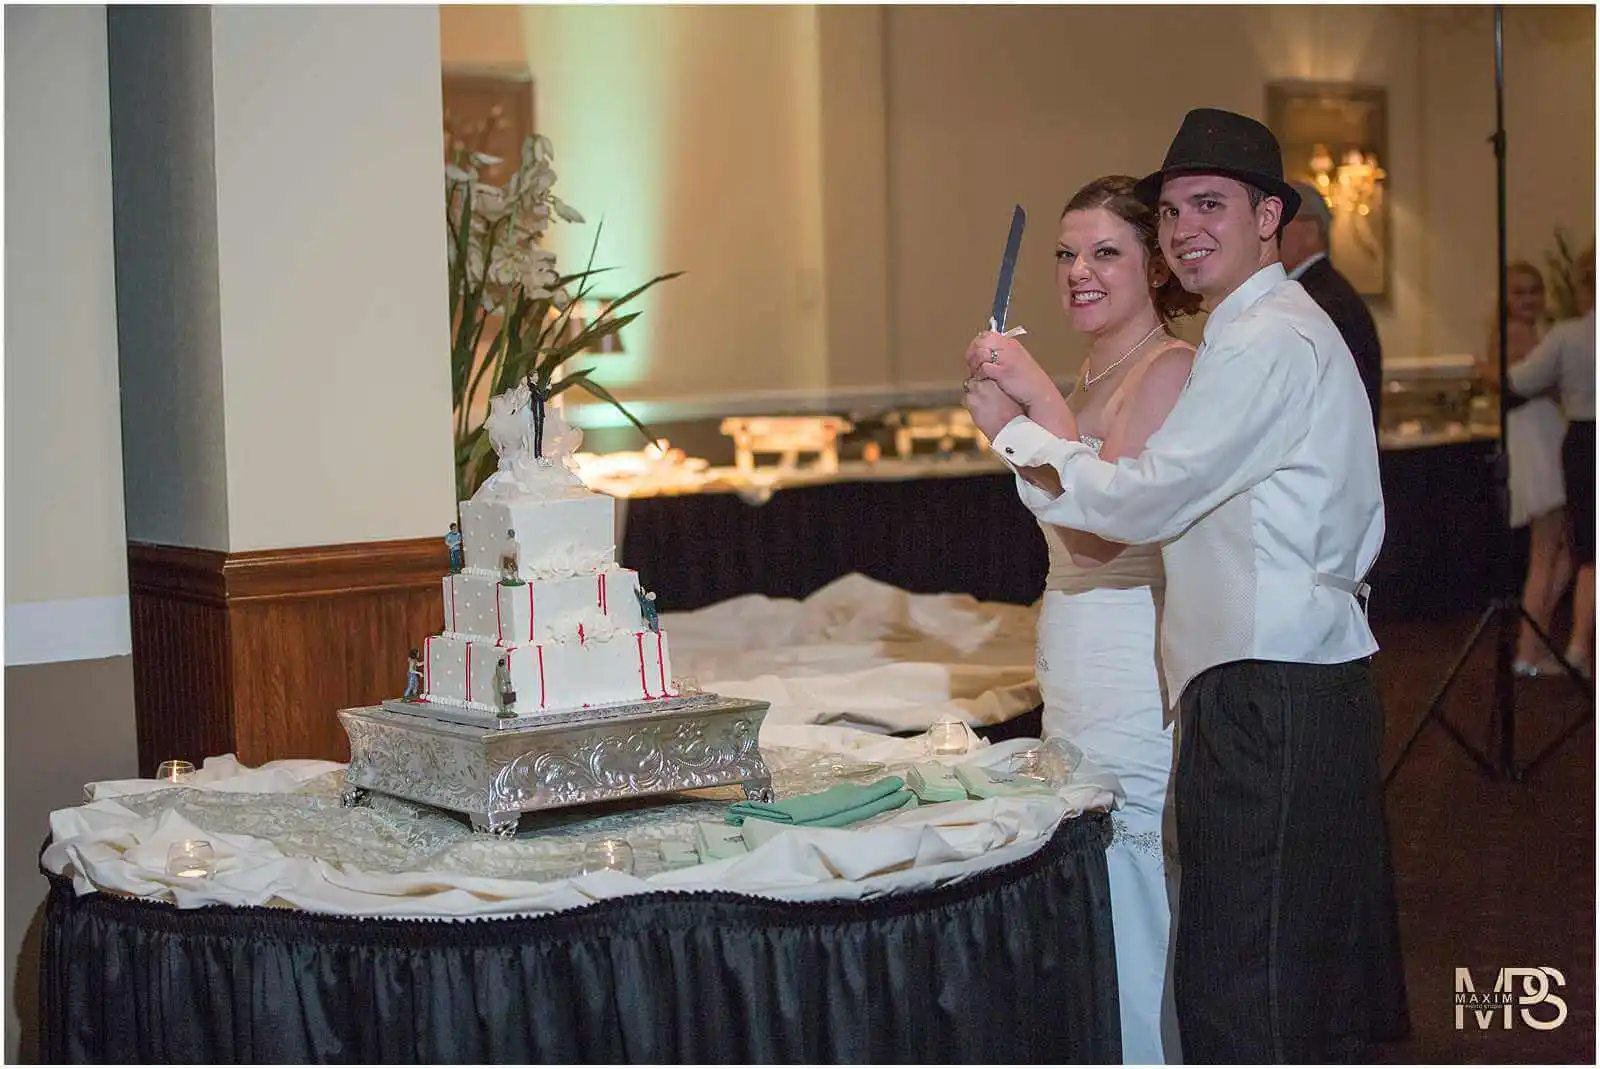 Bride and groom cutting multi-tiered wedding cake.